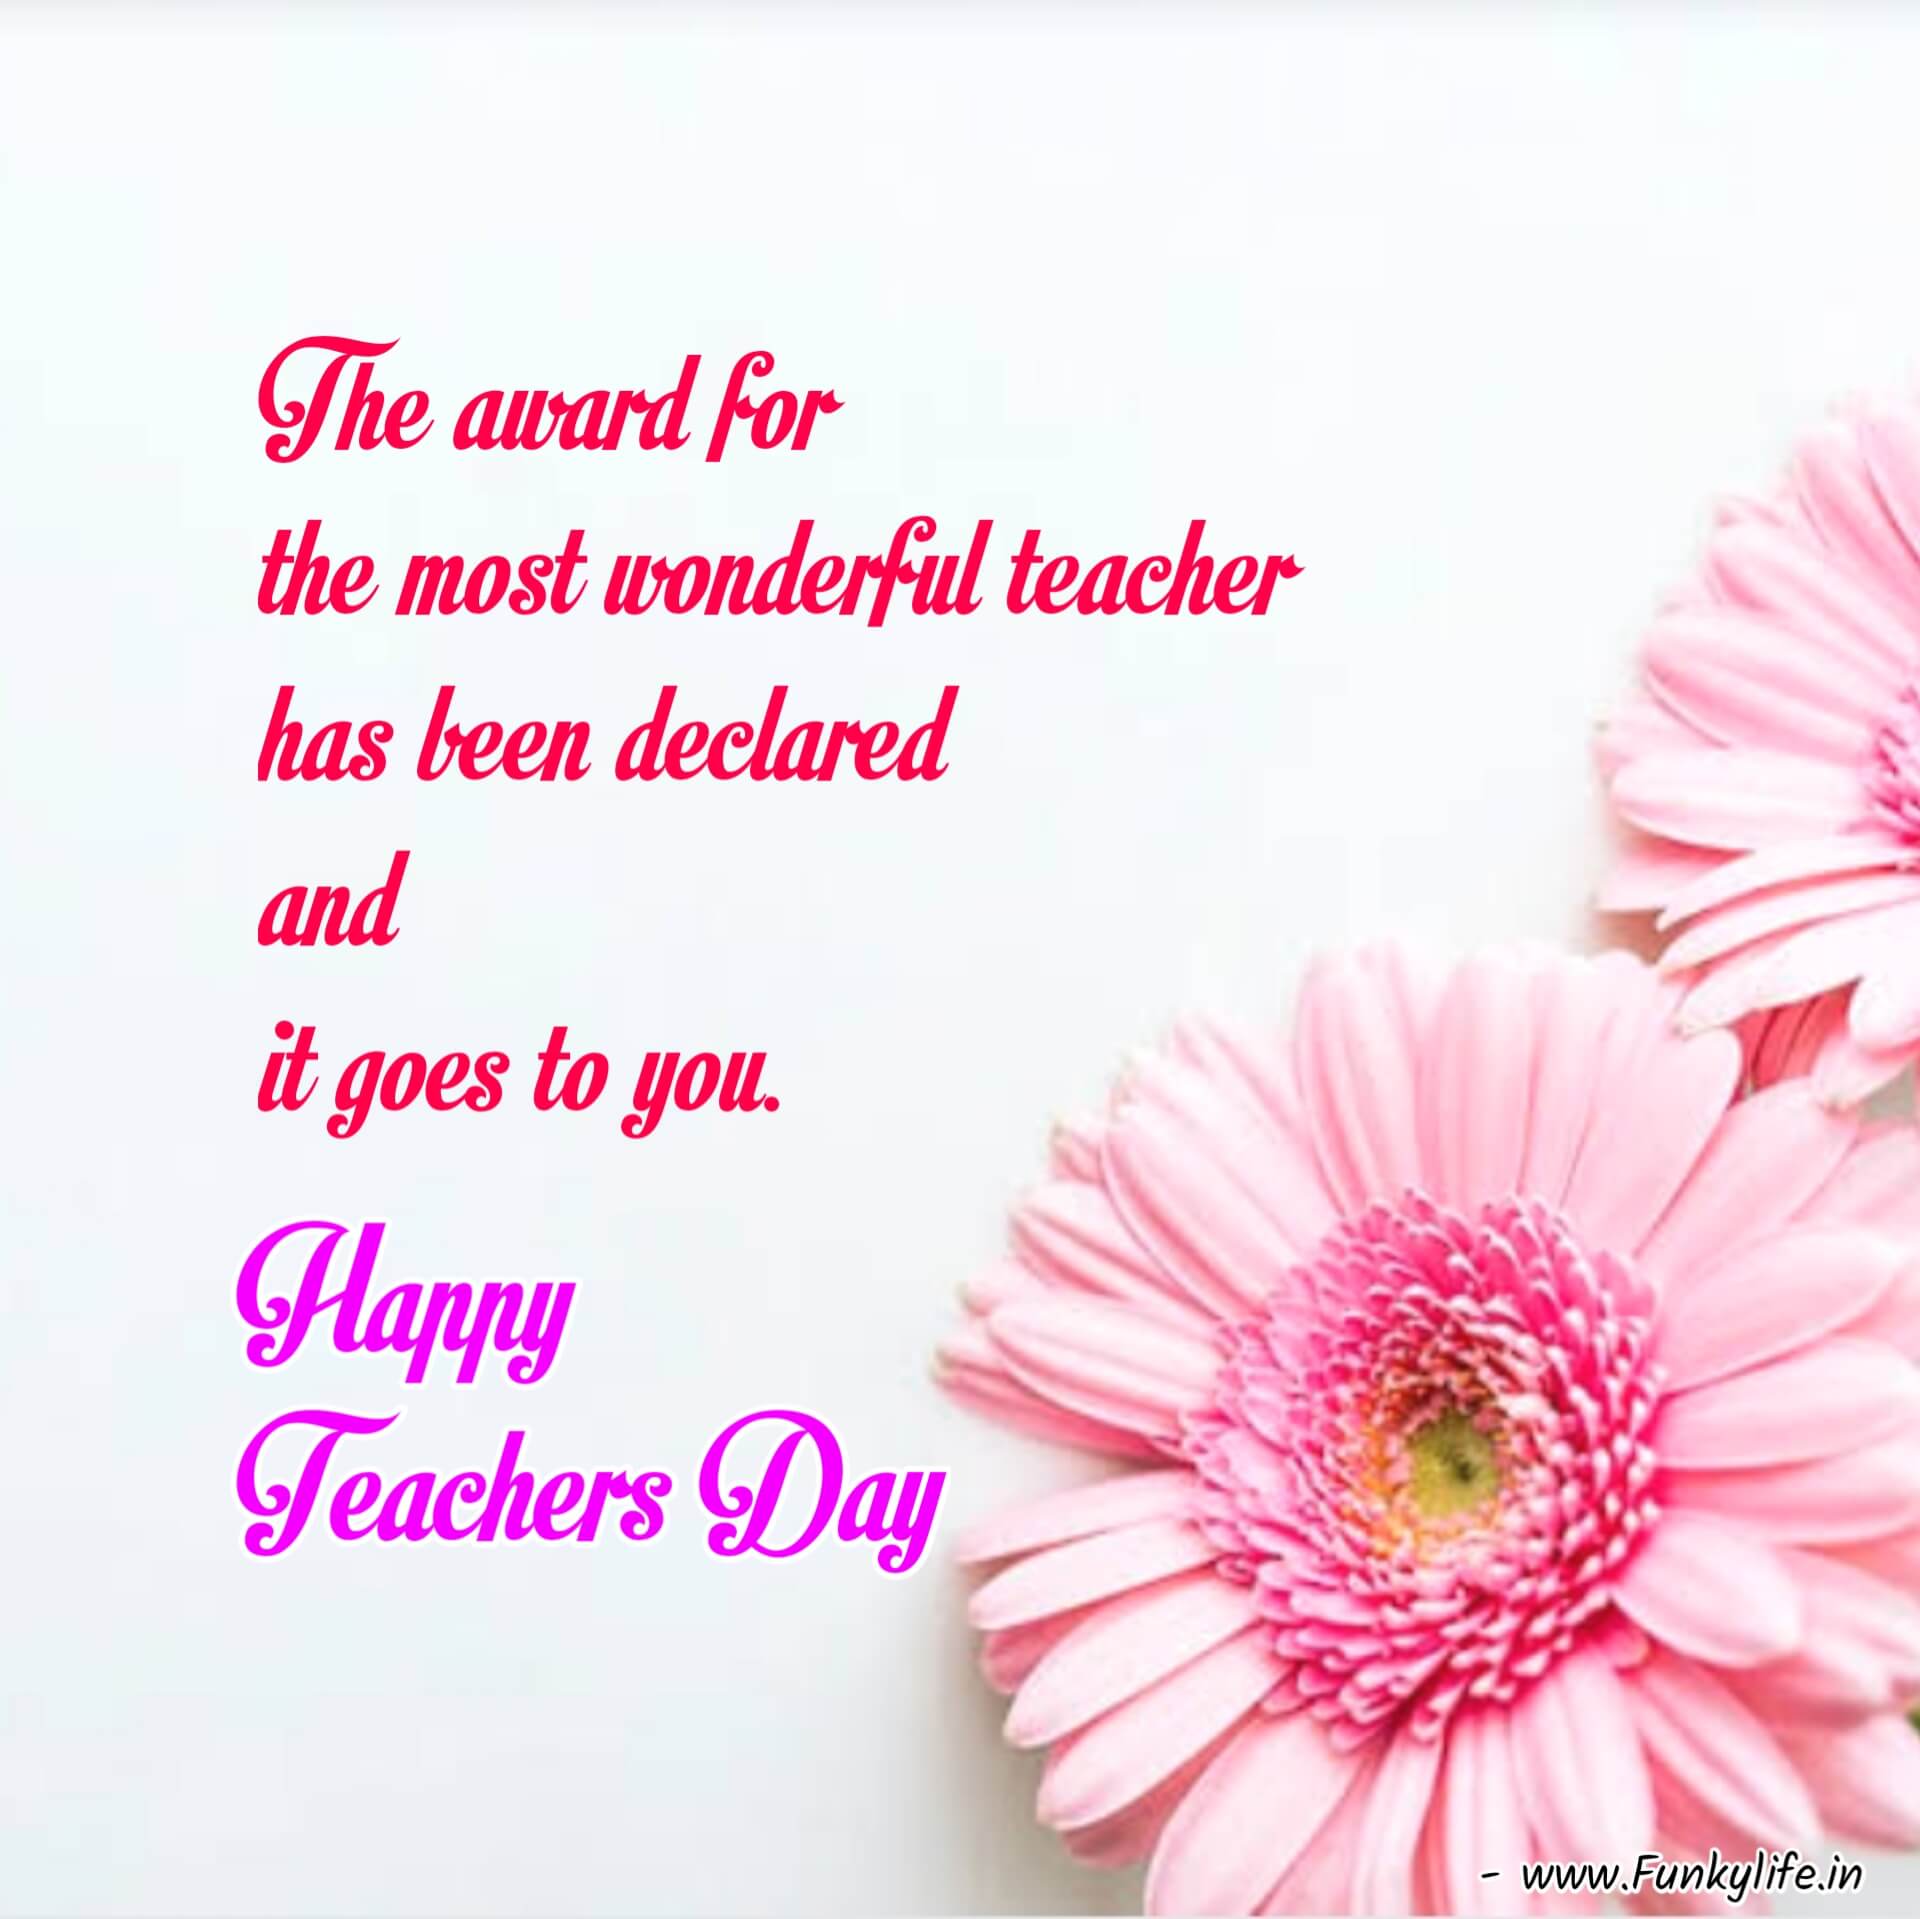 Happy Teachers Day Wishes Messages